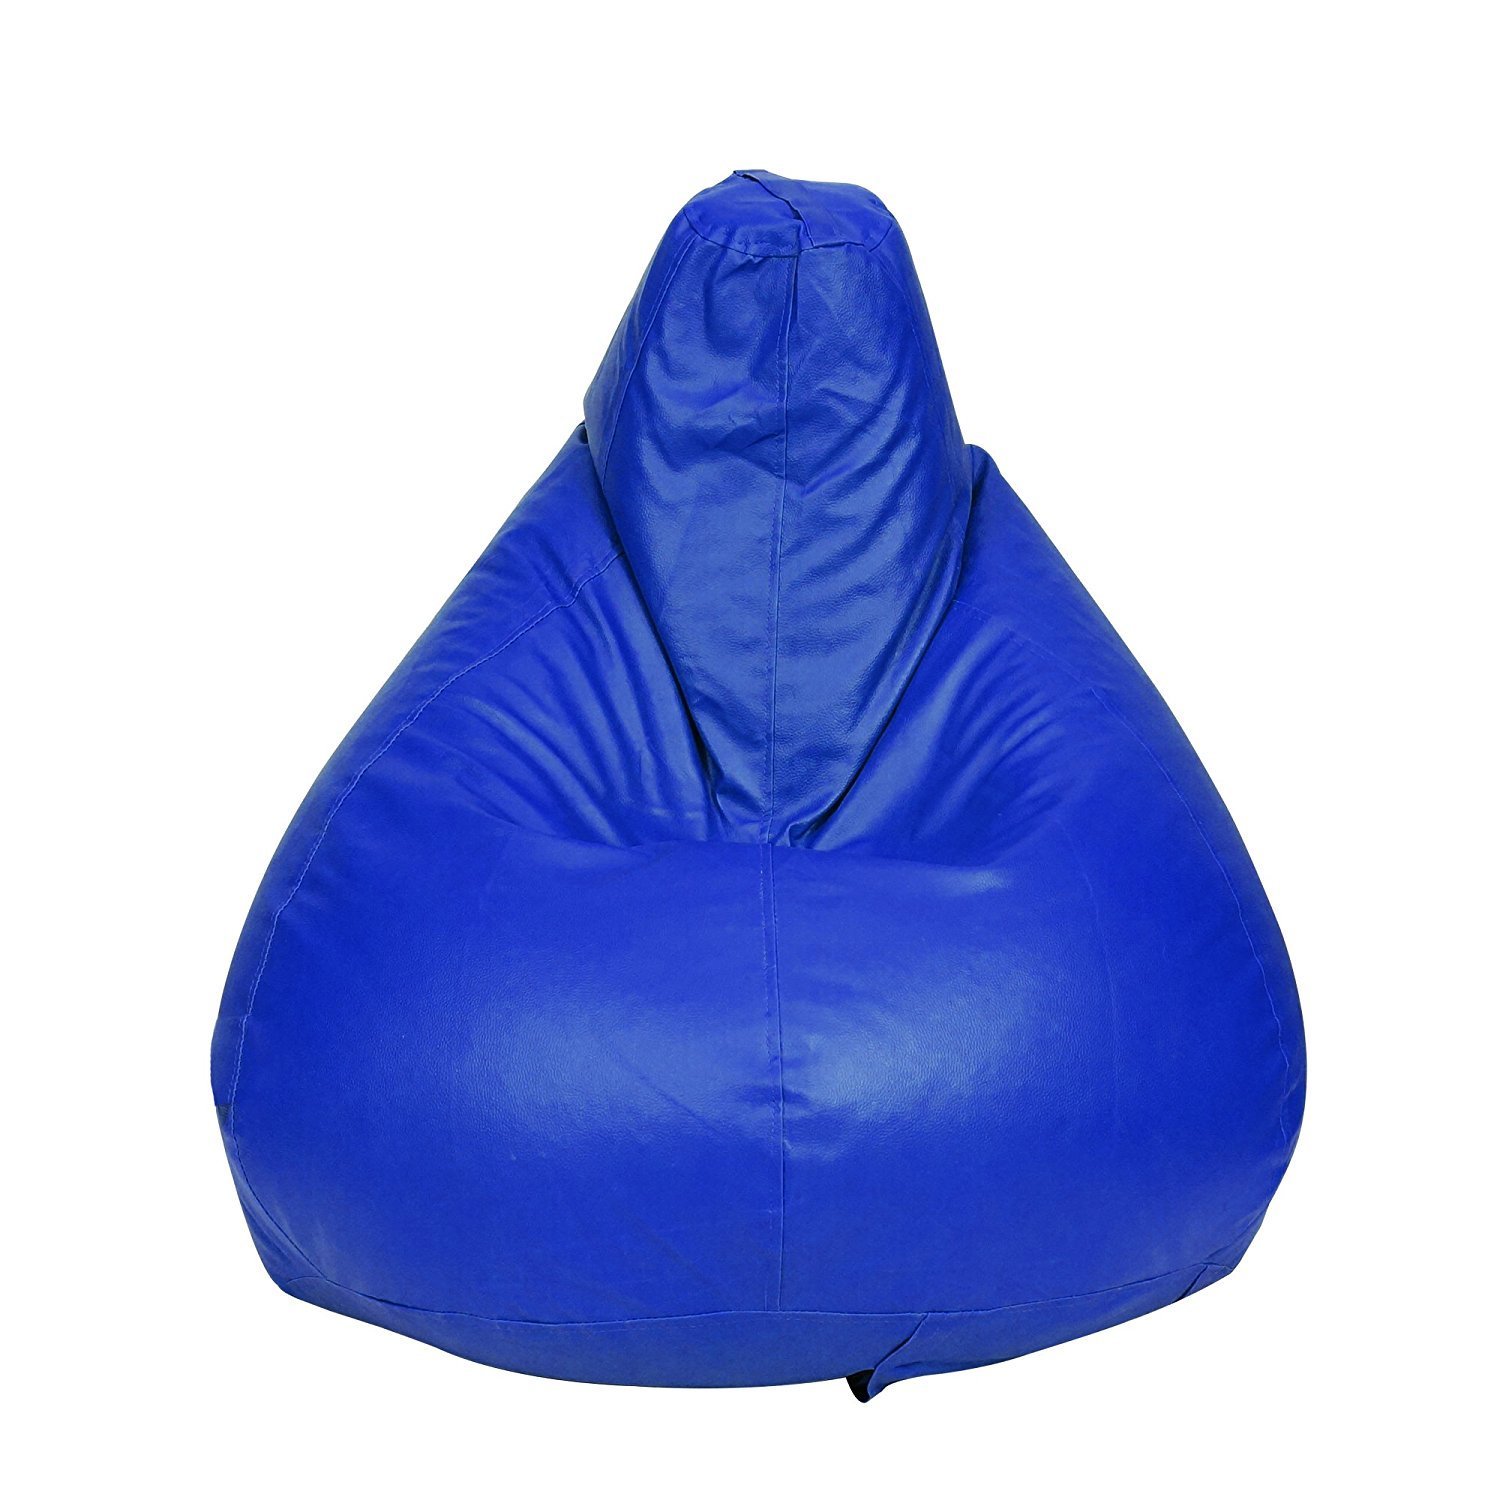 Buy Story@Home XL Leatherite Single Seating Tear Drop Bean Bag Chair Cover Without Filler, Blue for Rs 297 only